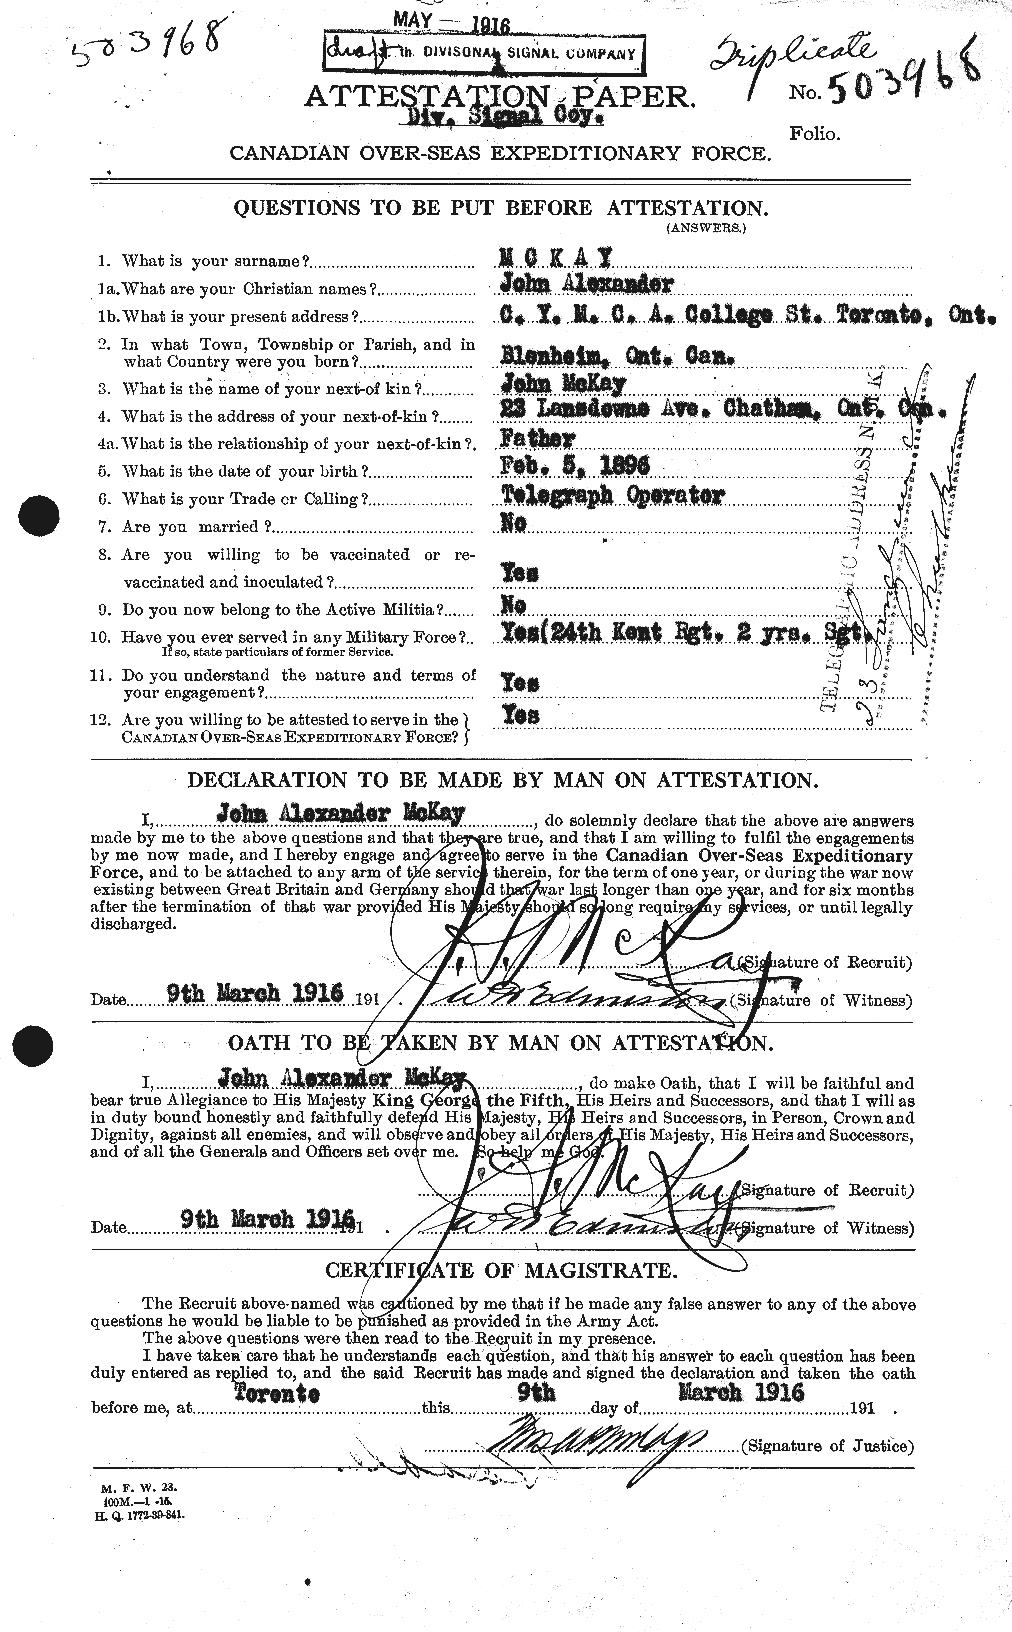 Personnel Records of the First World War - CEF 527021a